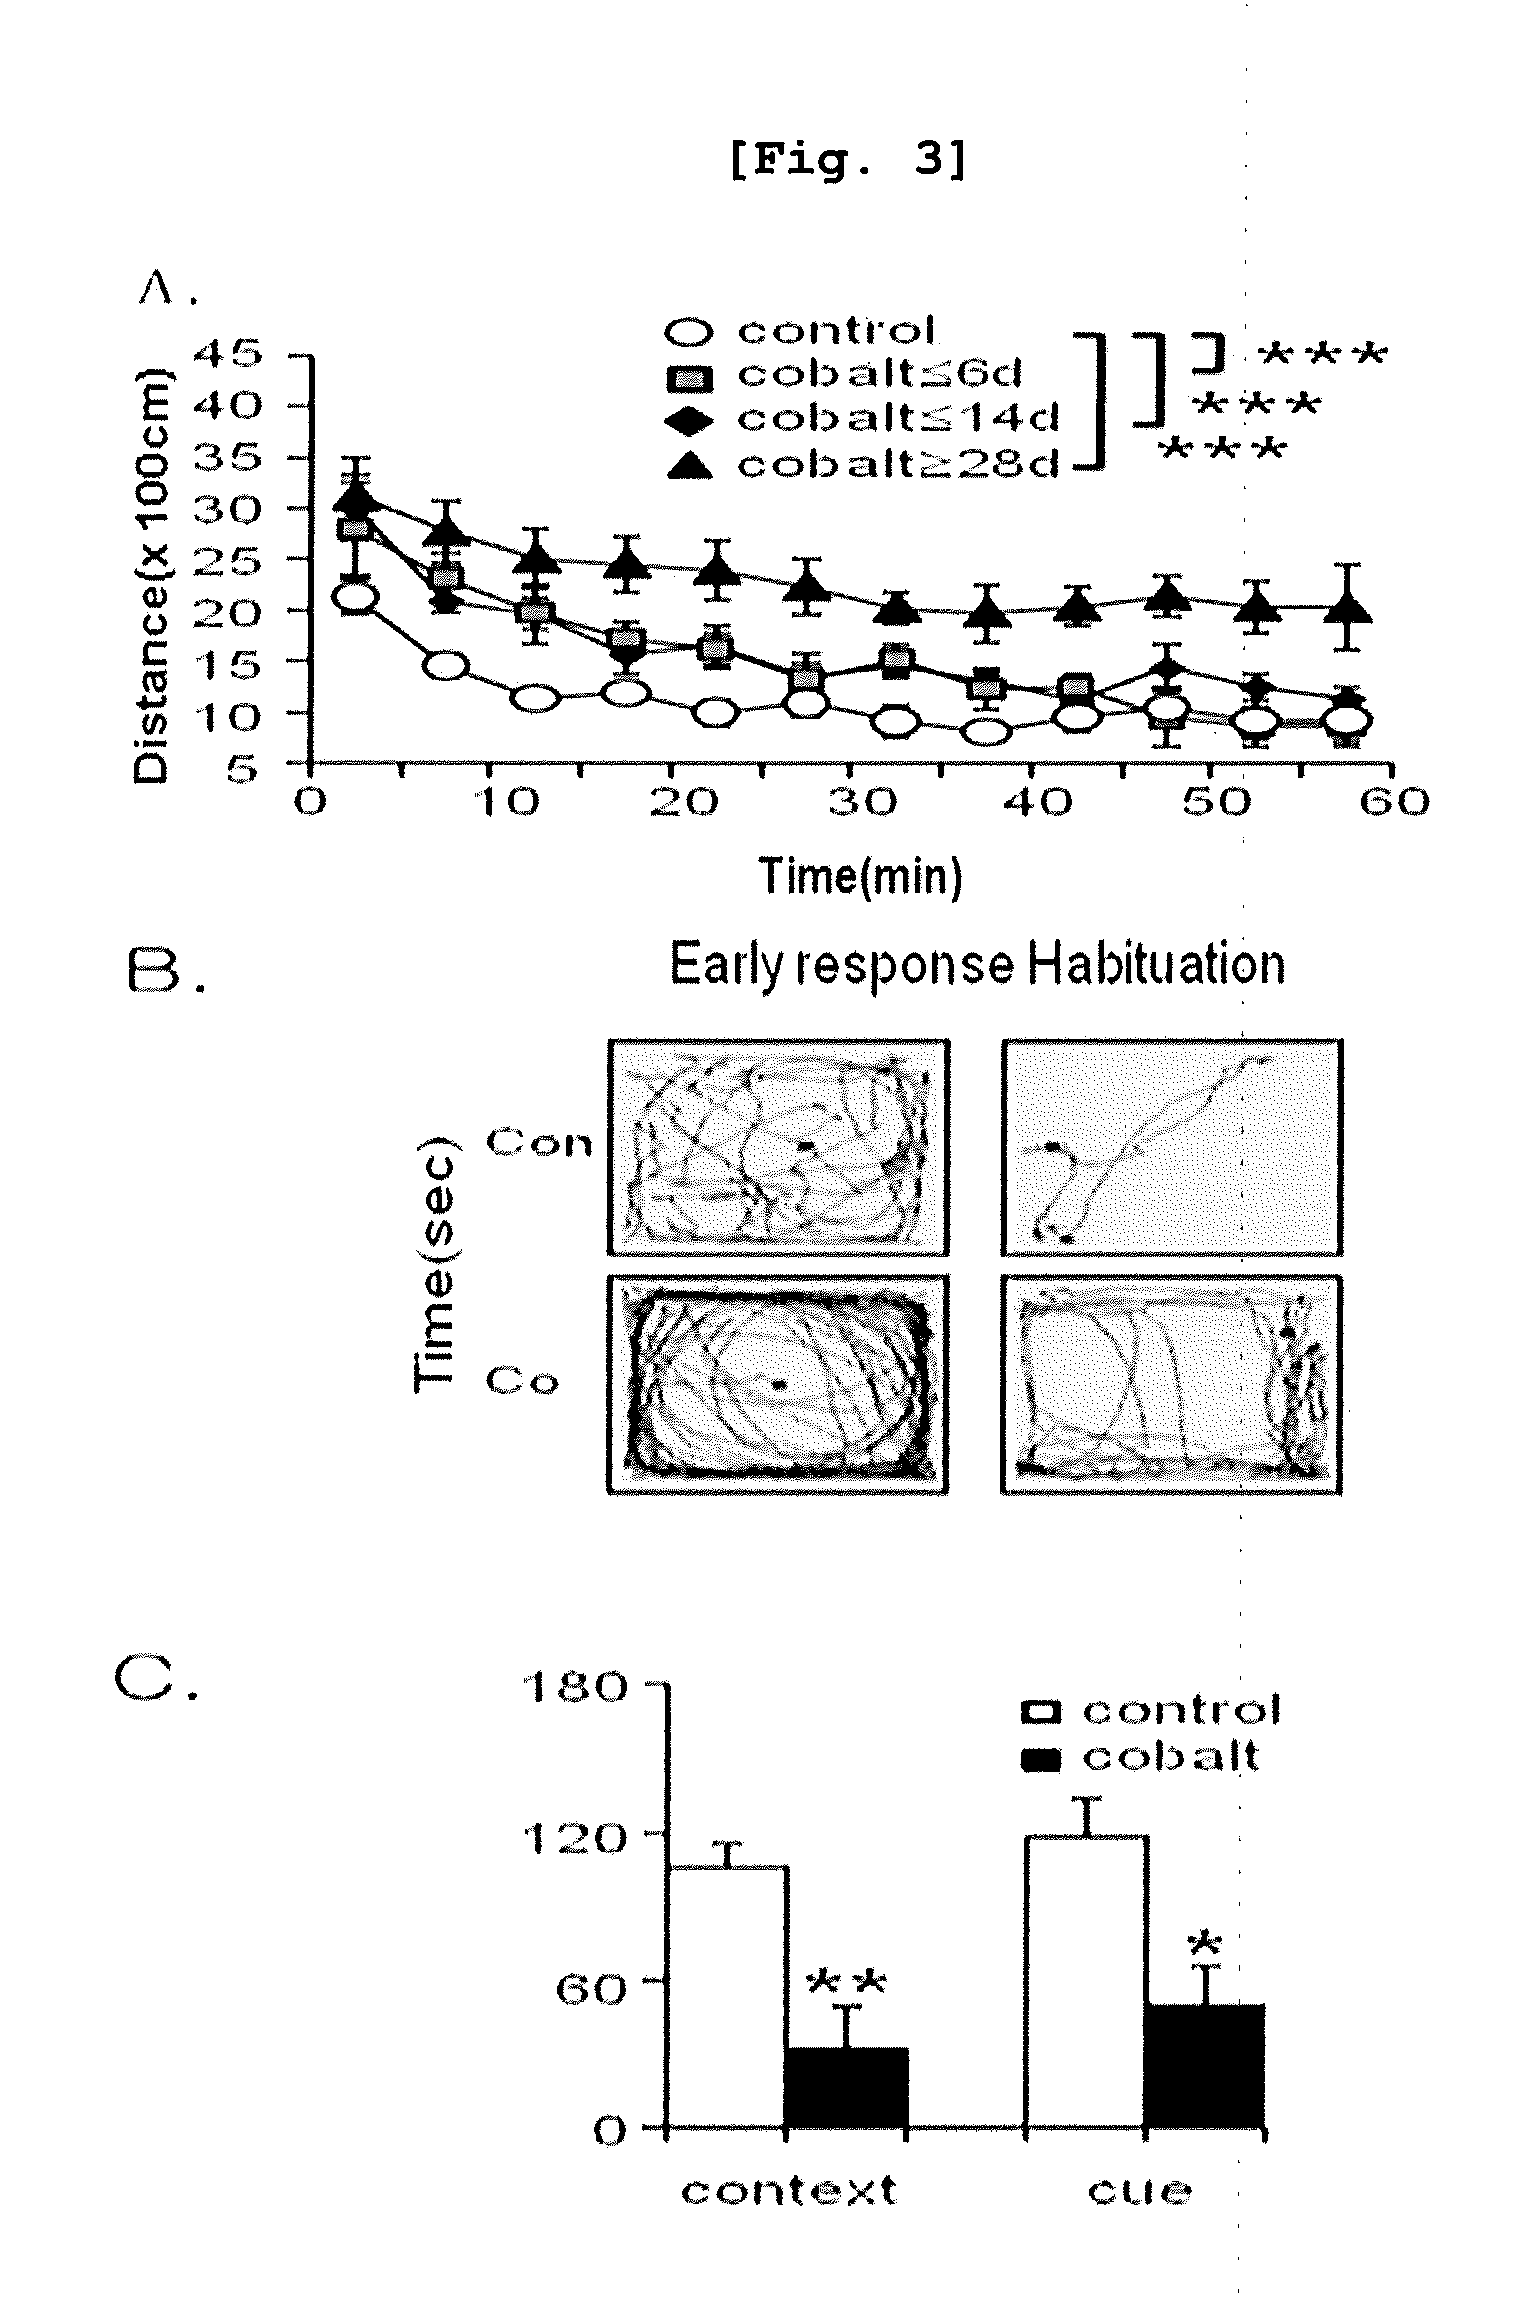 Model Mouse of Attention Deficit Hyperactivity Disorder, Method for Investigating Effects for Preventing and Alleviating Attention Disorder using the Model Mouse, and Method for Treating Attention Disorder by Suppressing T-Type Calcium Channel